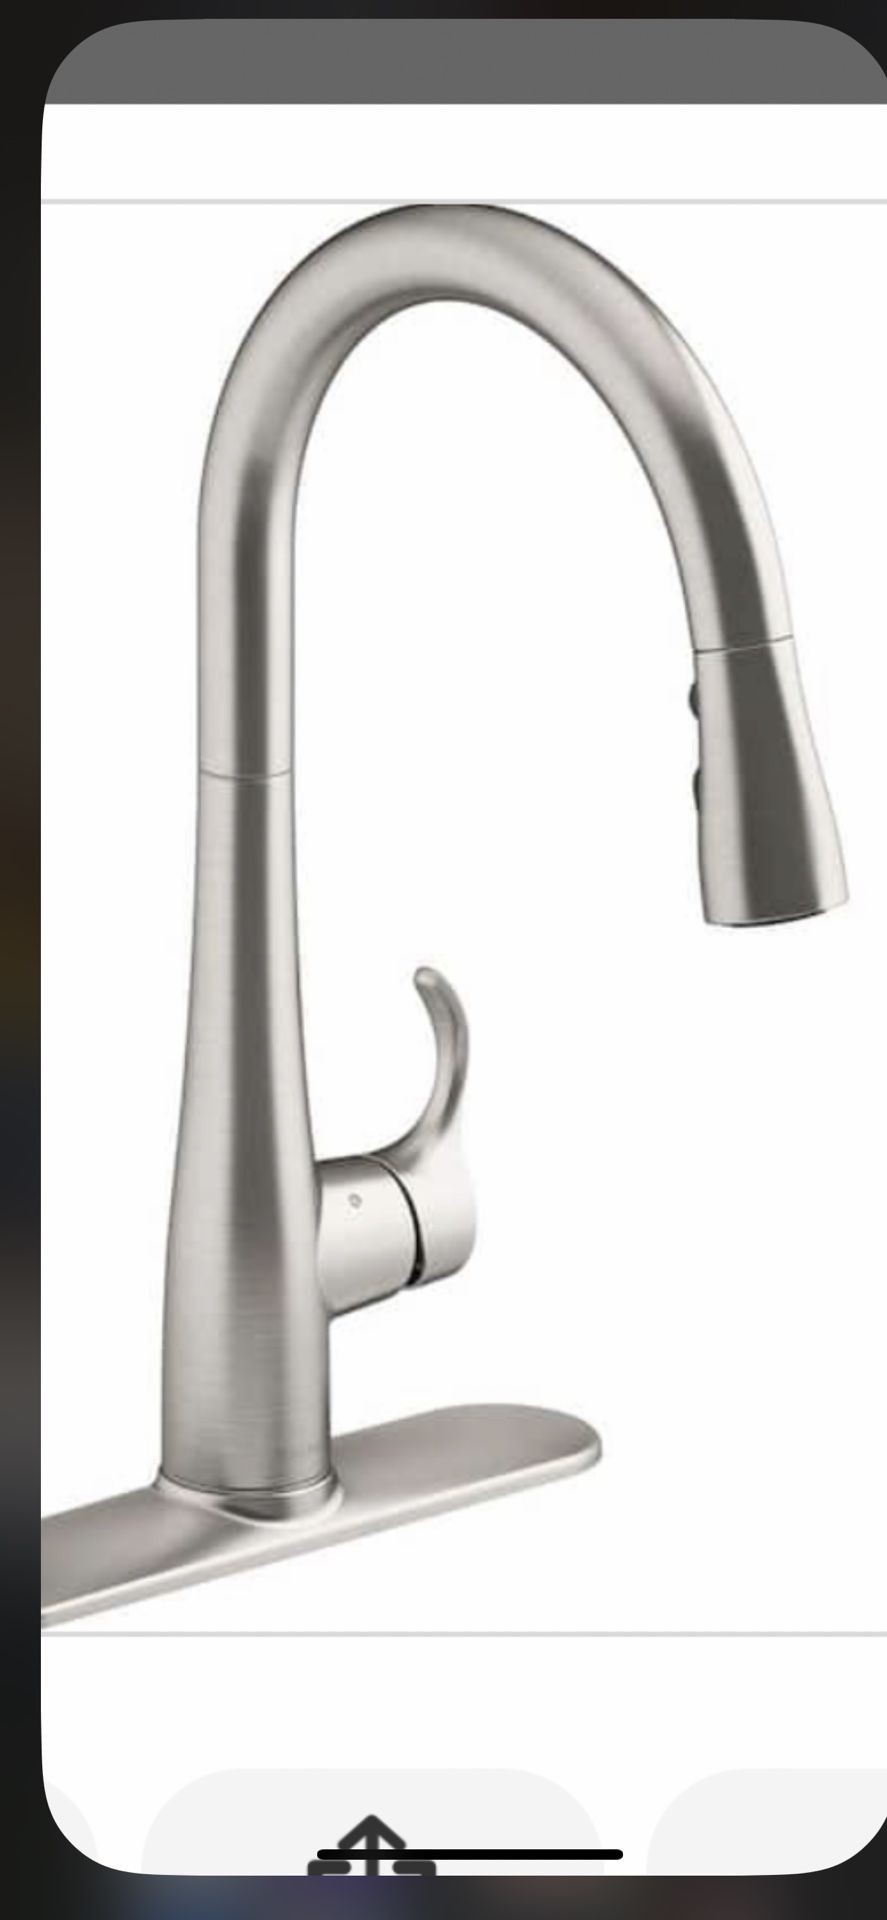 KOHLER Simplice Touchless Single-Handle Pull-Down Sprayer Kitchen Faucet in Vibrant Stainless (949)